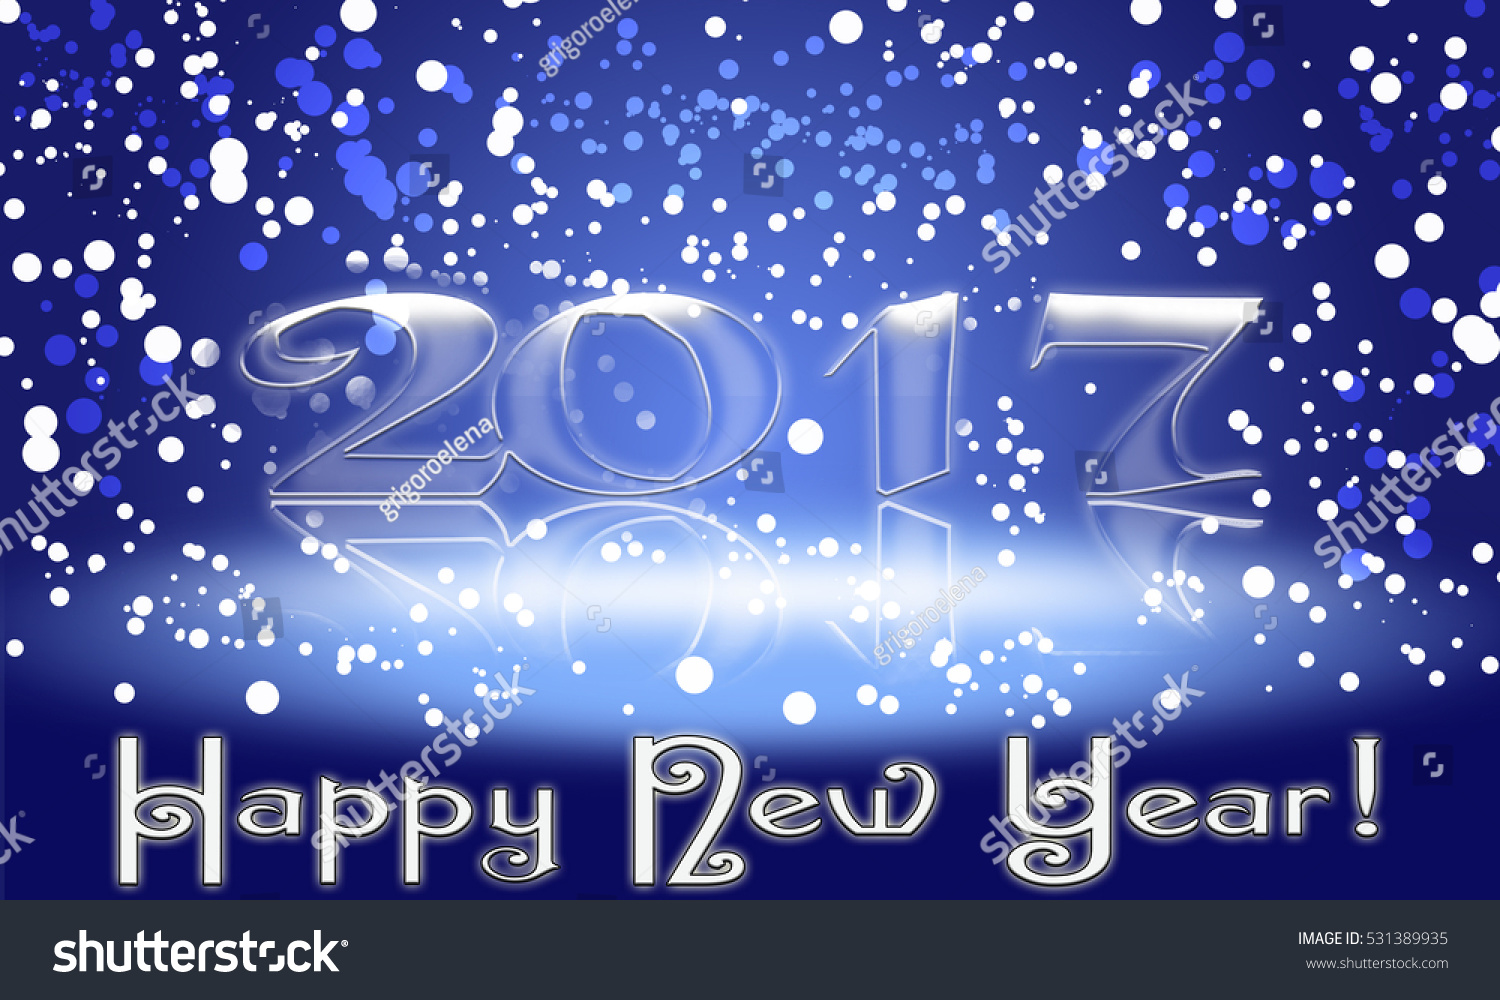 Happy New Year 2017 text design.  illustration with a white  and blue numbers #531389935